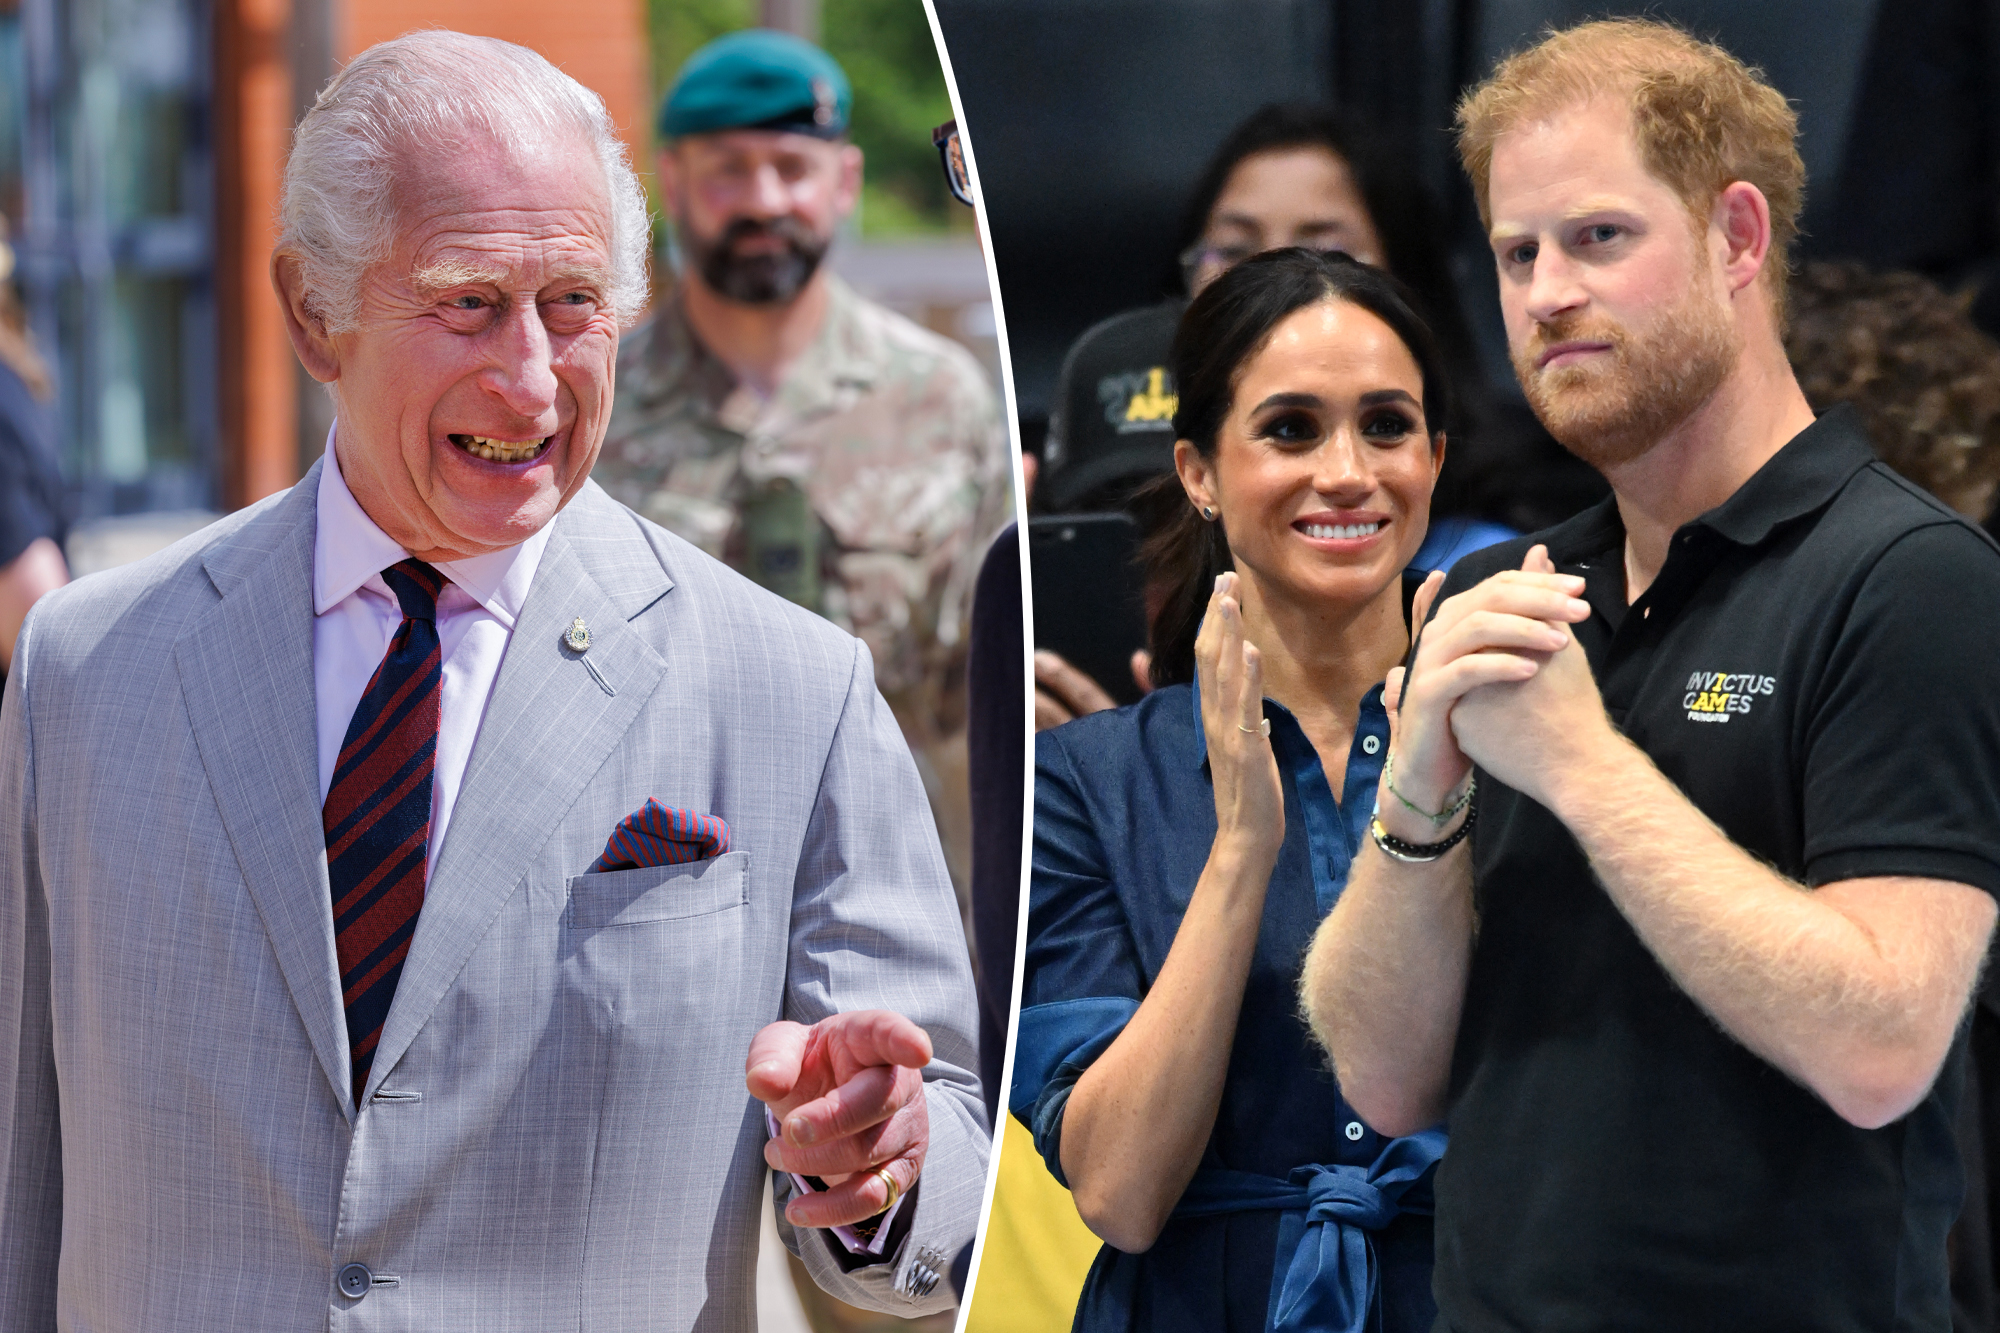 King Charles throws party for working royals during Prince Harry's Invictus Games service